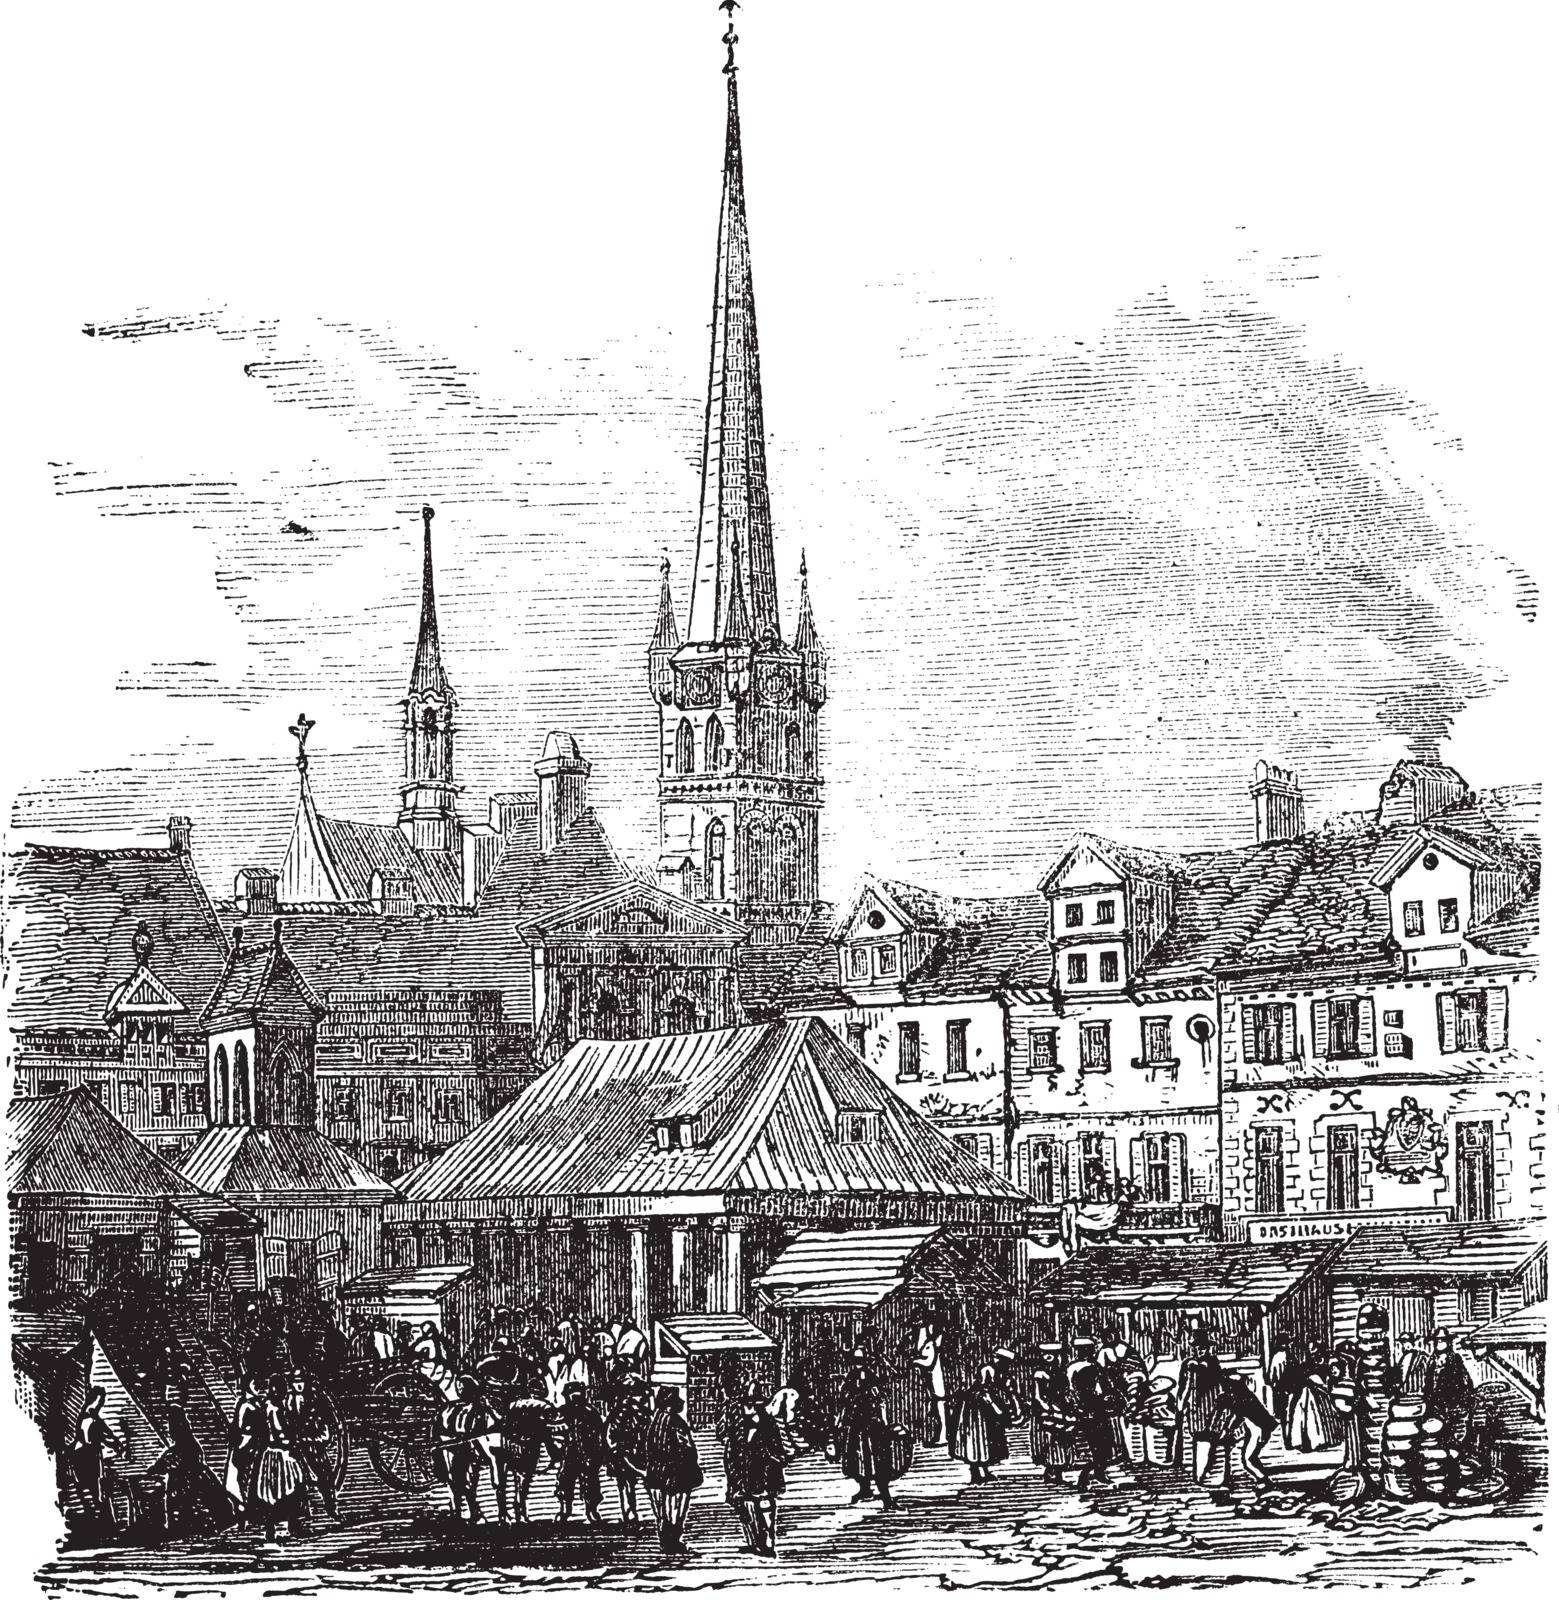 Market Place of Lubeck, Germany, during the 1890s, vintage engraving. Old engraved illustration of Market Place of Lubeck with people and shops.